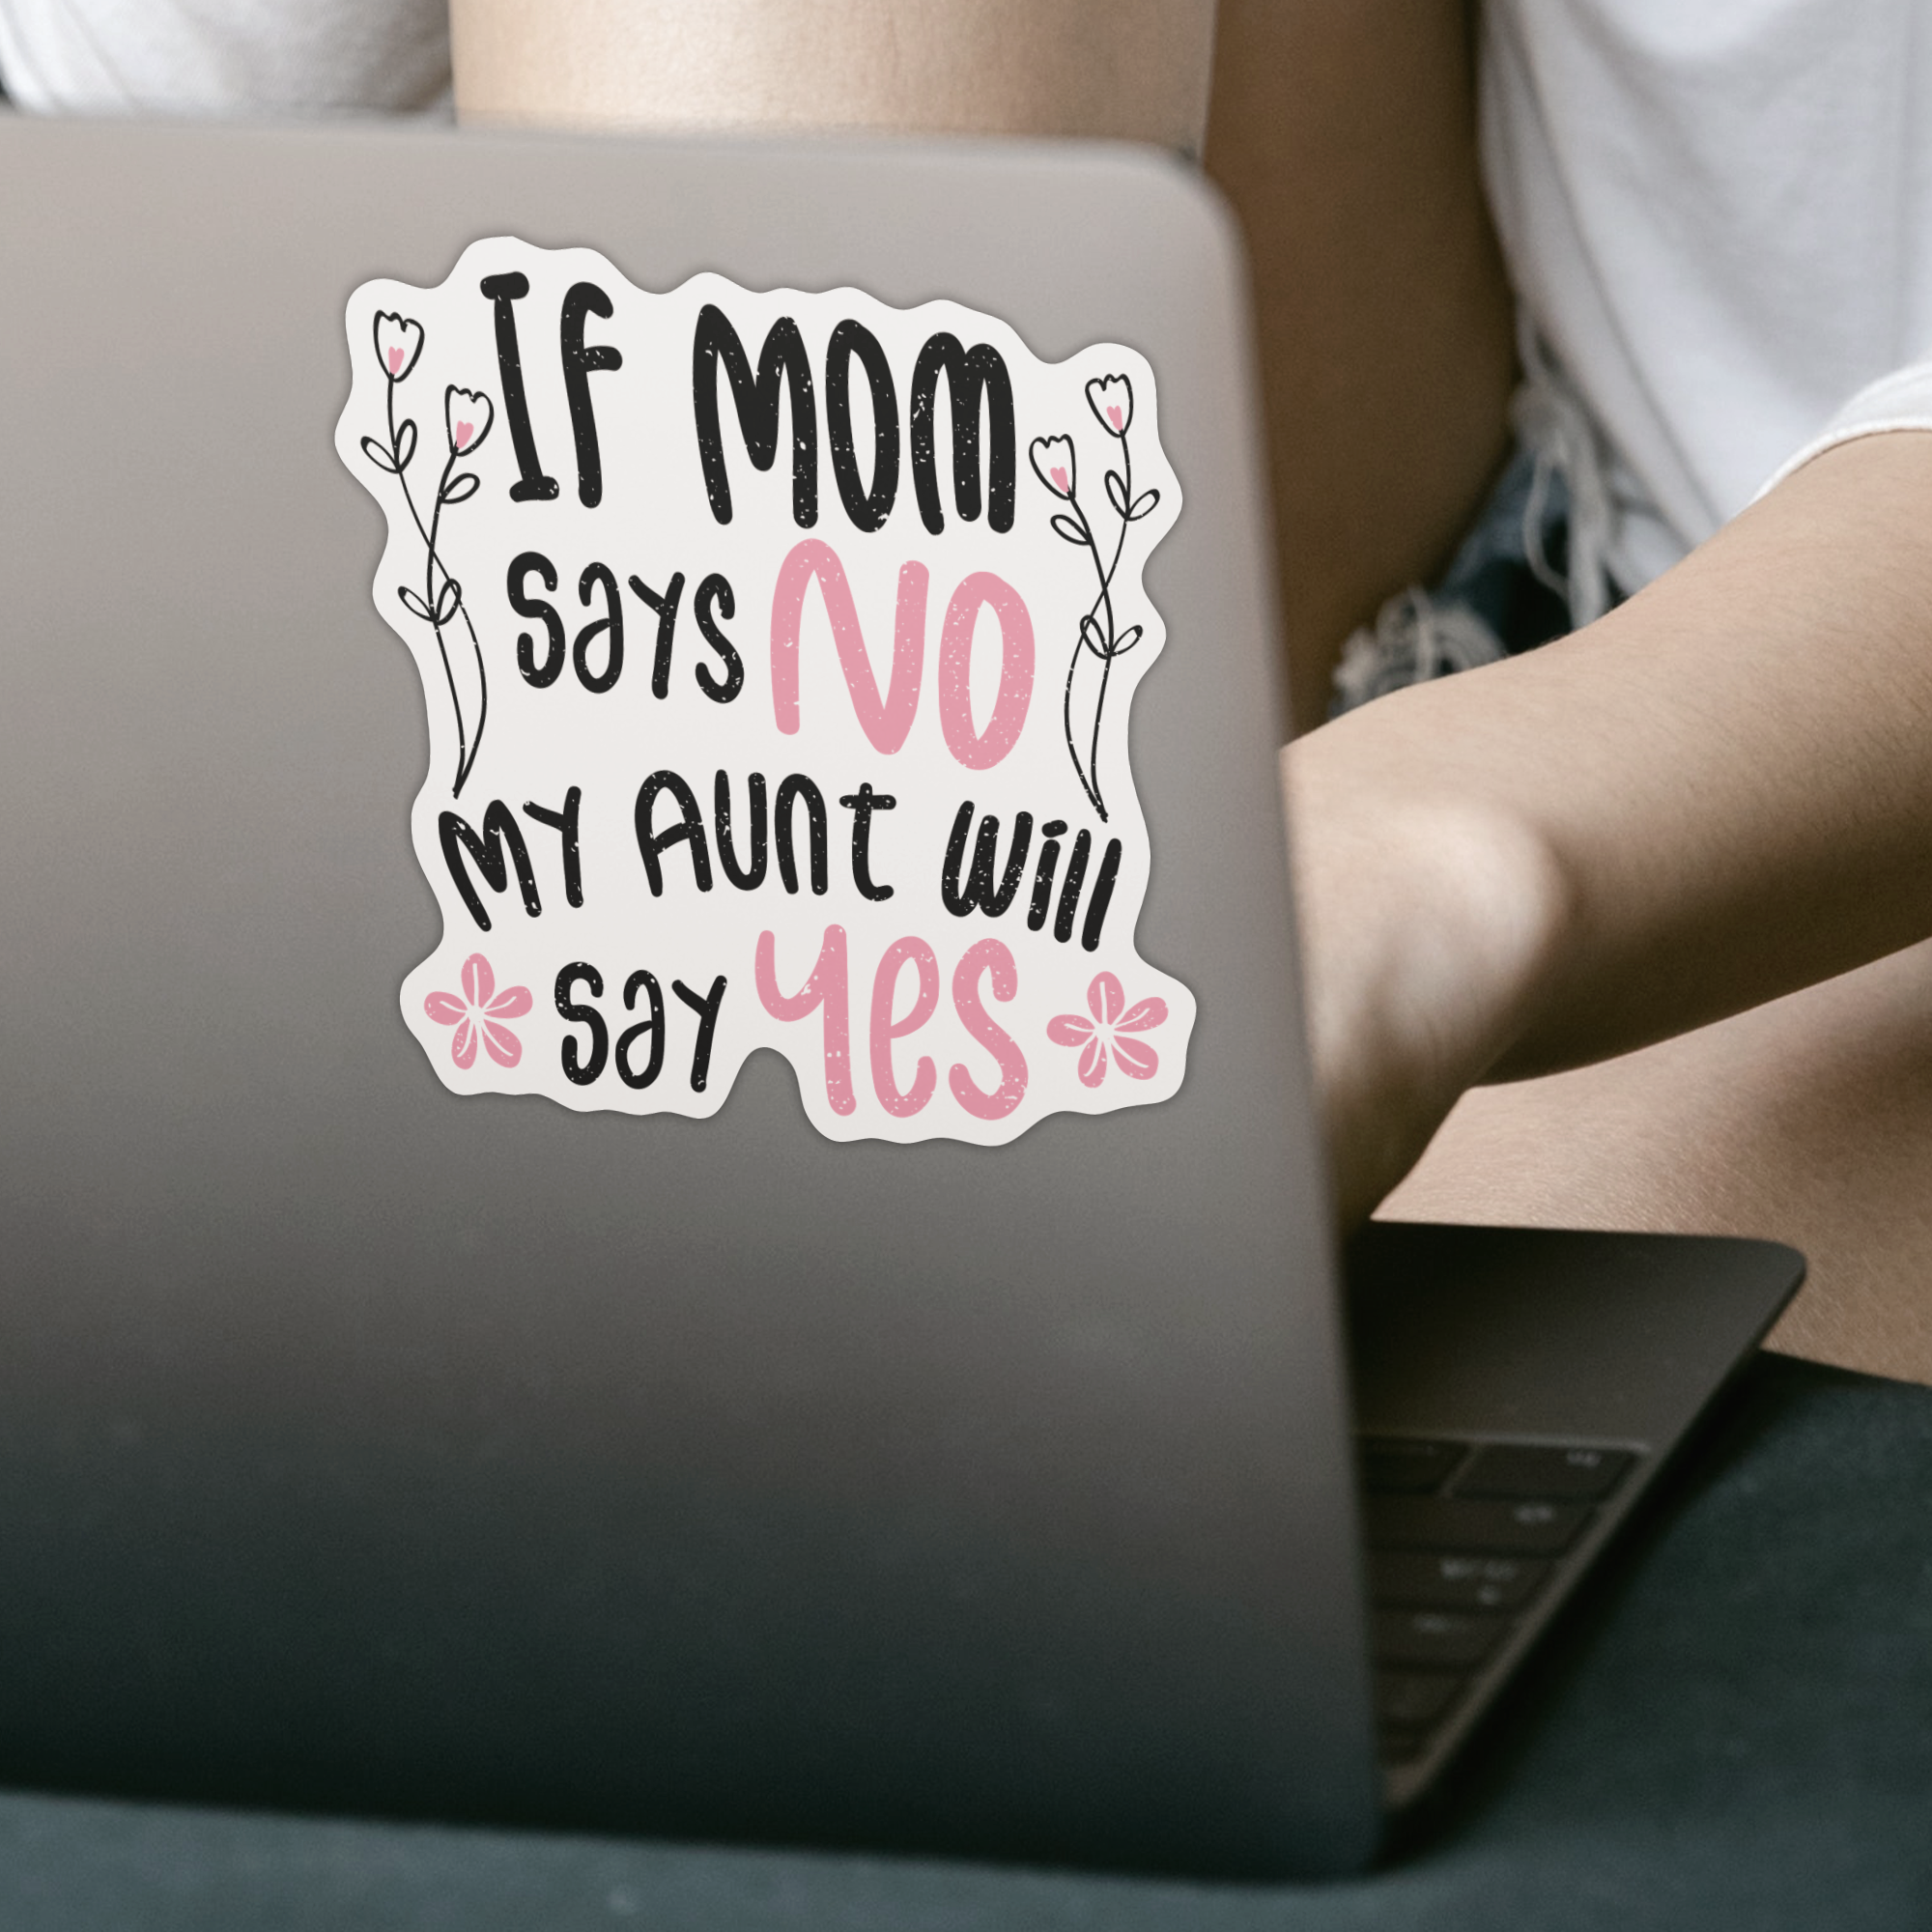 If Mom Says No My Aunt Will Say Yes Sticker - DESIGNSBYJNK5.COM